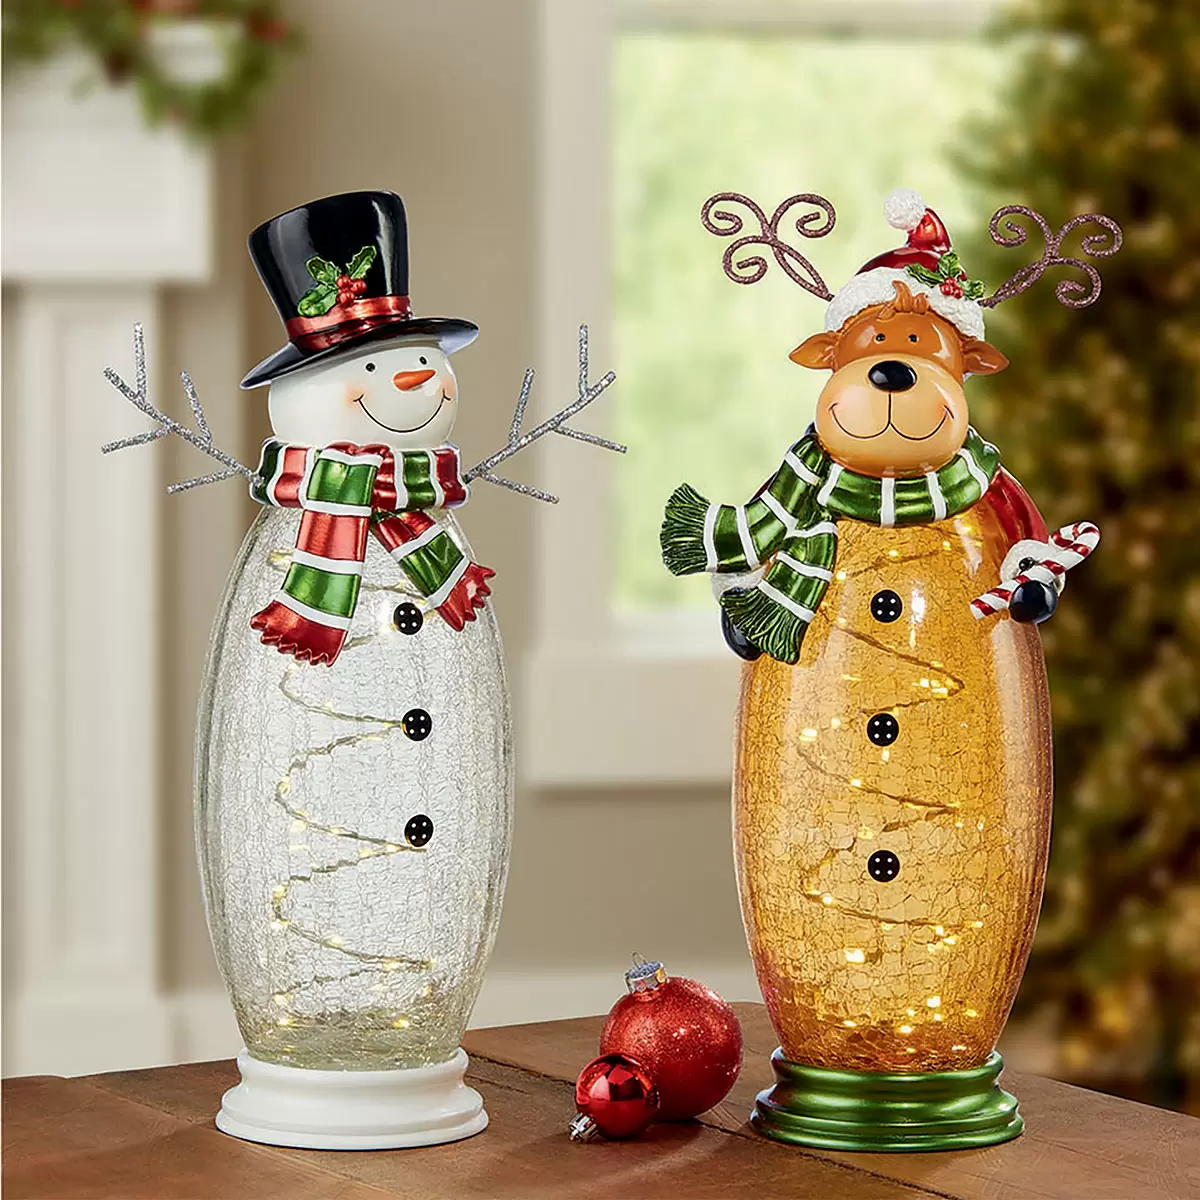 Buy Crackle Glass Snowman & Moose Lifestyle Image at Costco.co.uk